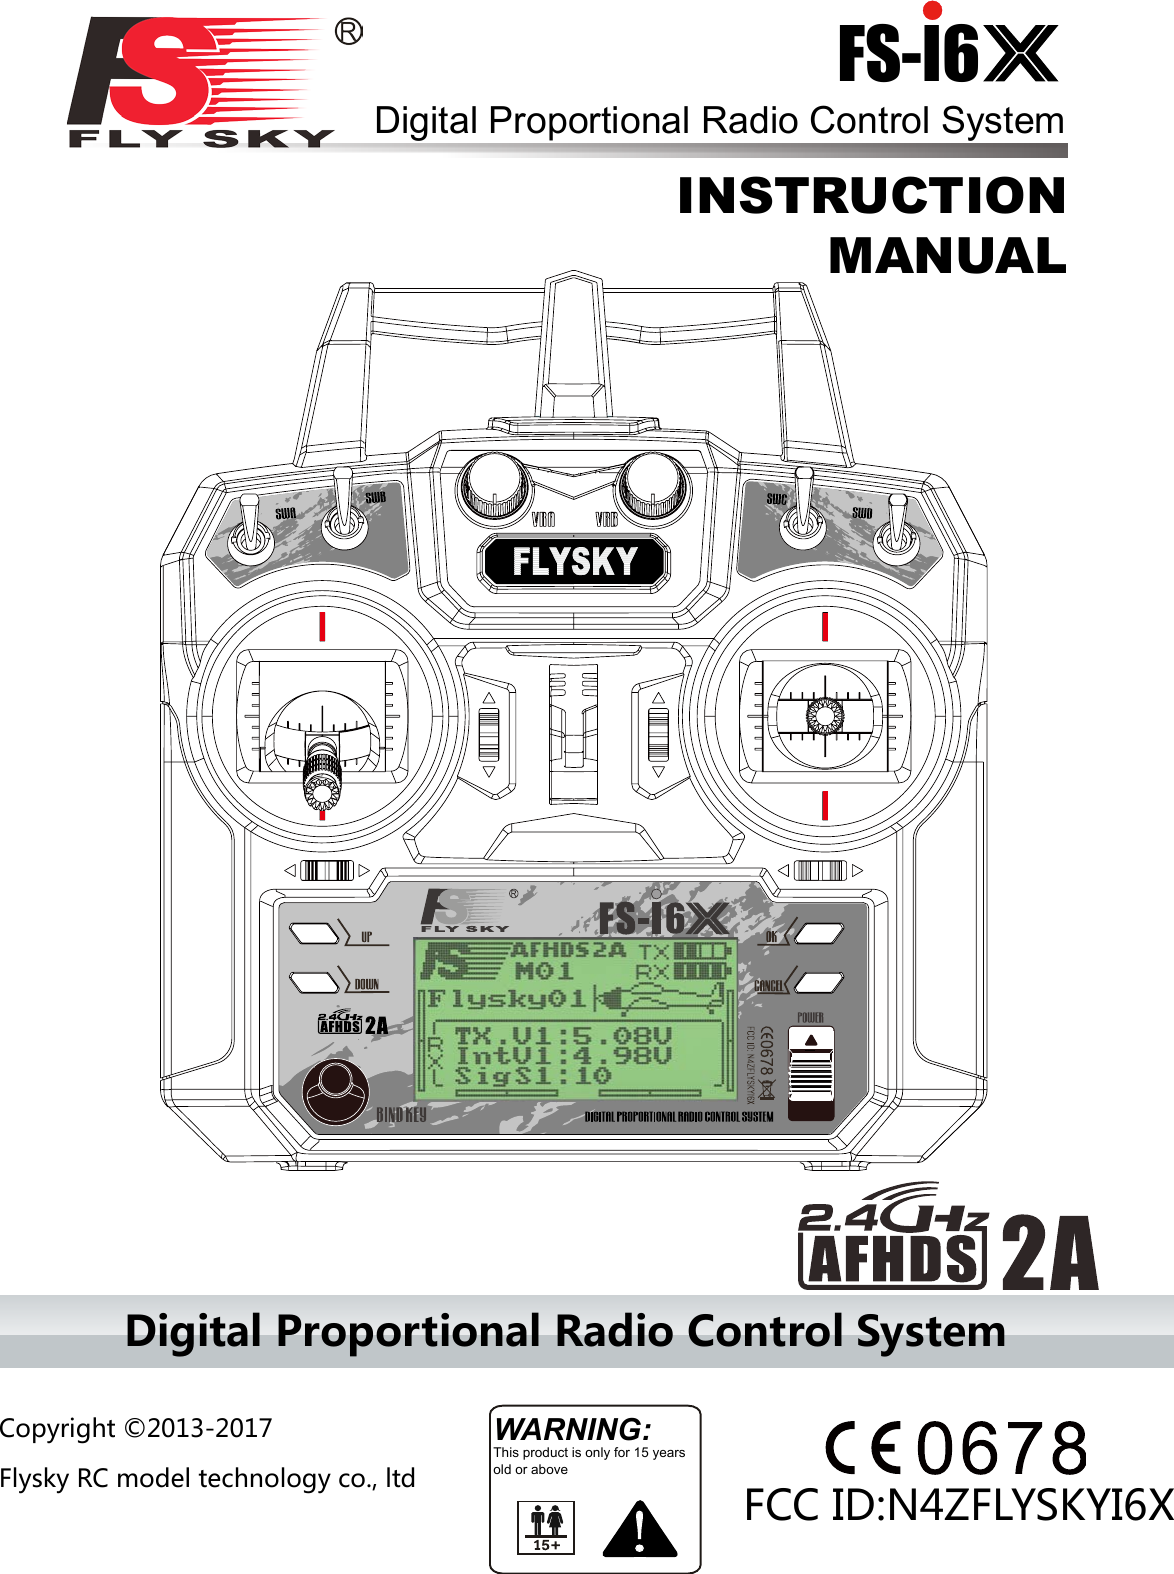 Digital Proportional Radio Control SystemWARNING:This product is only for 15 years old or aboveINSTRUCTION MANUALDigital Proportional Radio Control SystemCopyright ©2013-2017 Flysky RC model technology co., ltdFS-l6     FCC ID:N4ZFLYSKYI6X